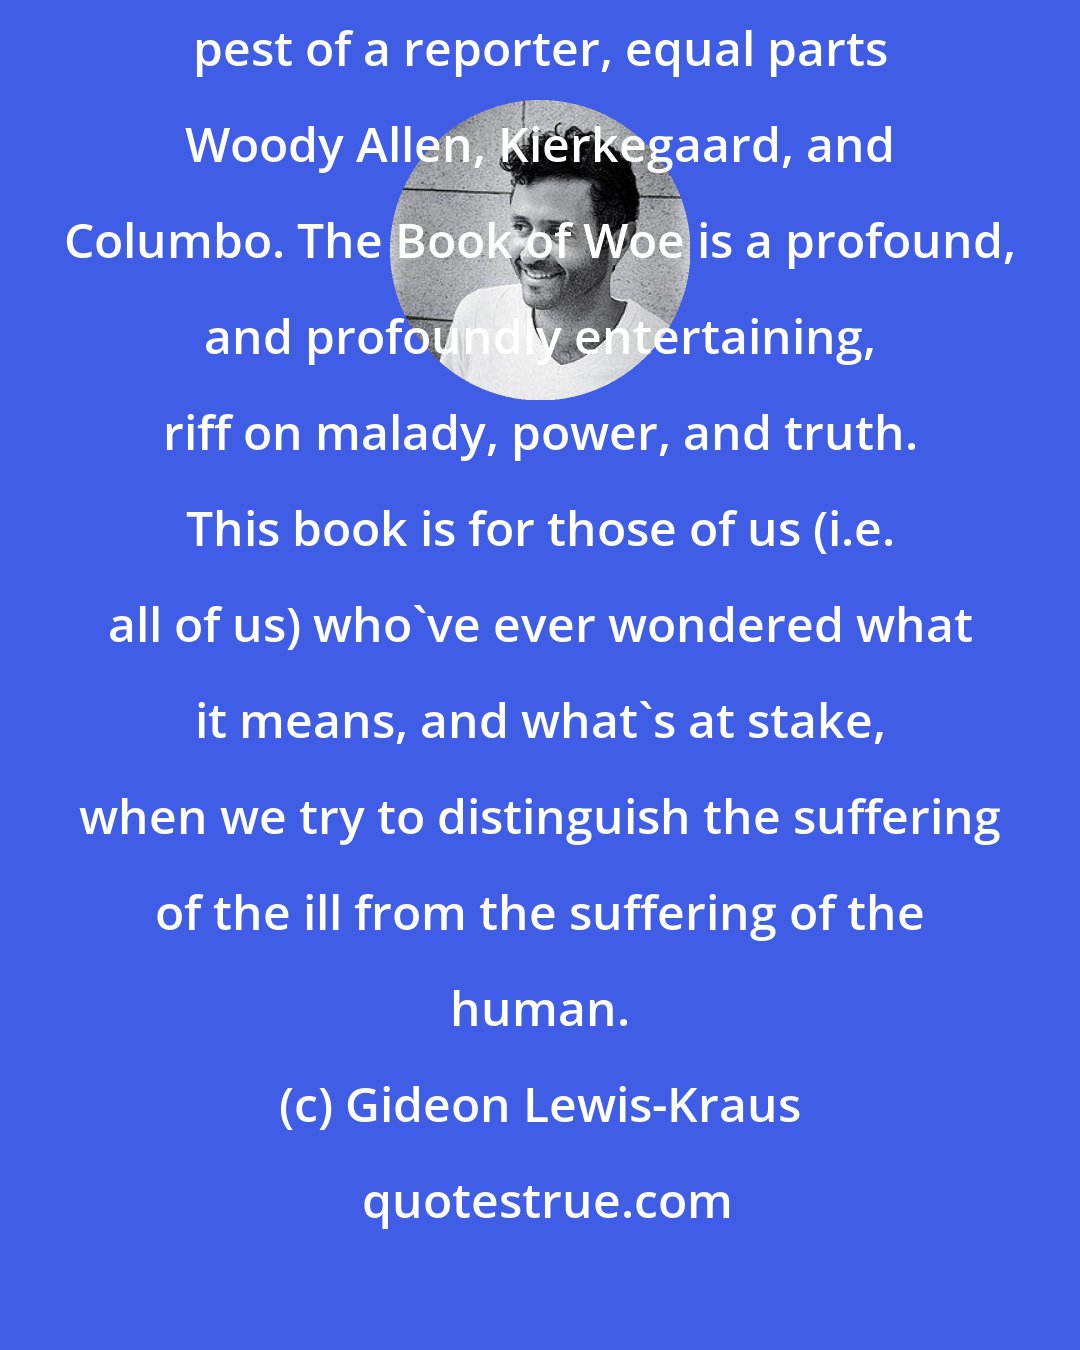 Gideon Lewis-Kraus: Gary Greenberg is a thoughtful comedian and a cranky philosopher and a humble pest of a reporter, equal parts Woody Allen, Kierkegaard, and Columbo. The Book of Woe is a profound, and profoundly entertaining, riff on malady, power, and truth. This book is for those of us (i.e. all of us) who've ever wondered what it means, and what's at stake, when we try to distinguish the suffering of the ill from the suffering of the human.